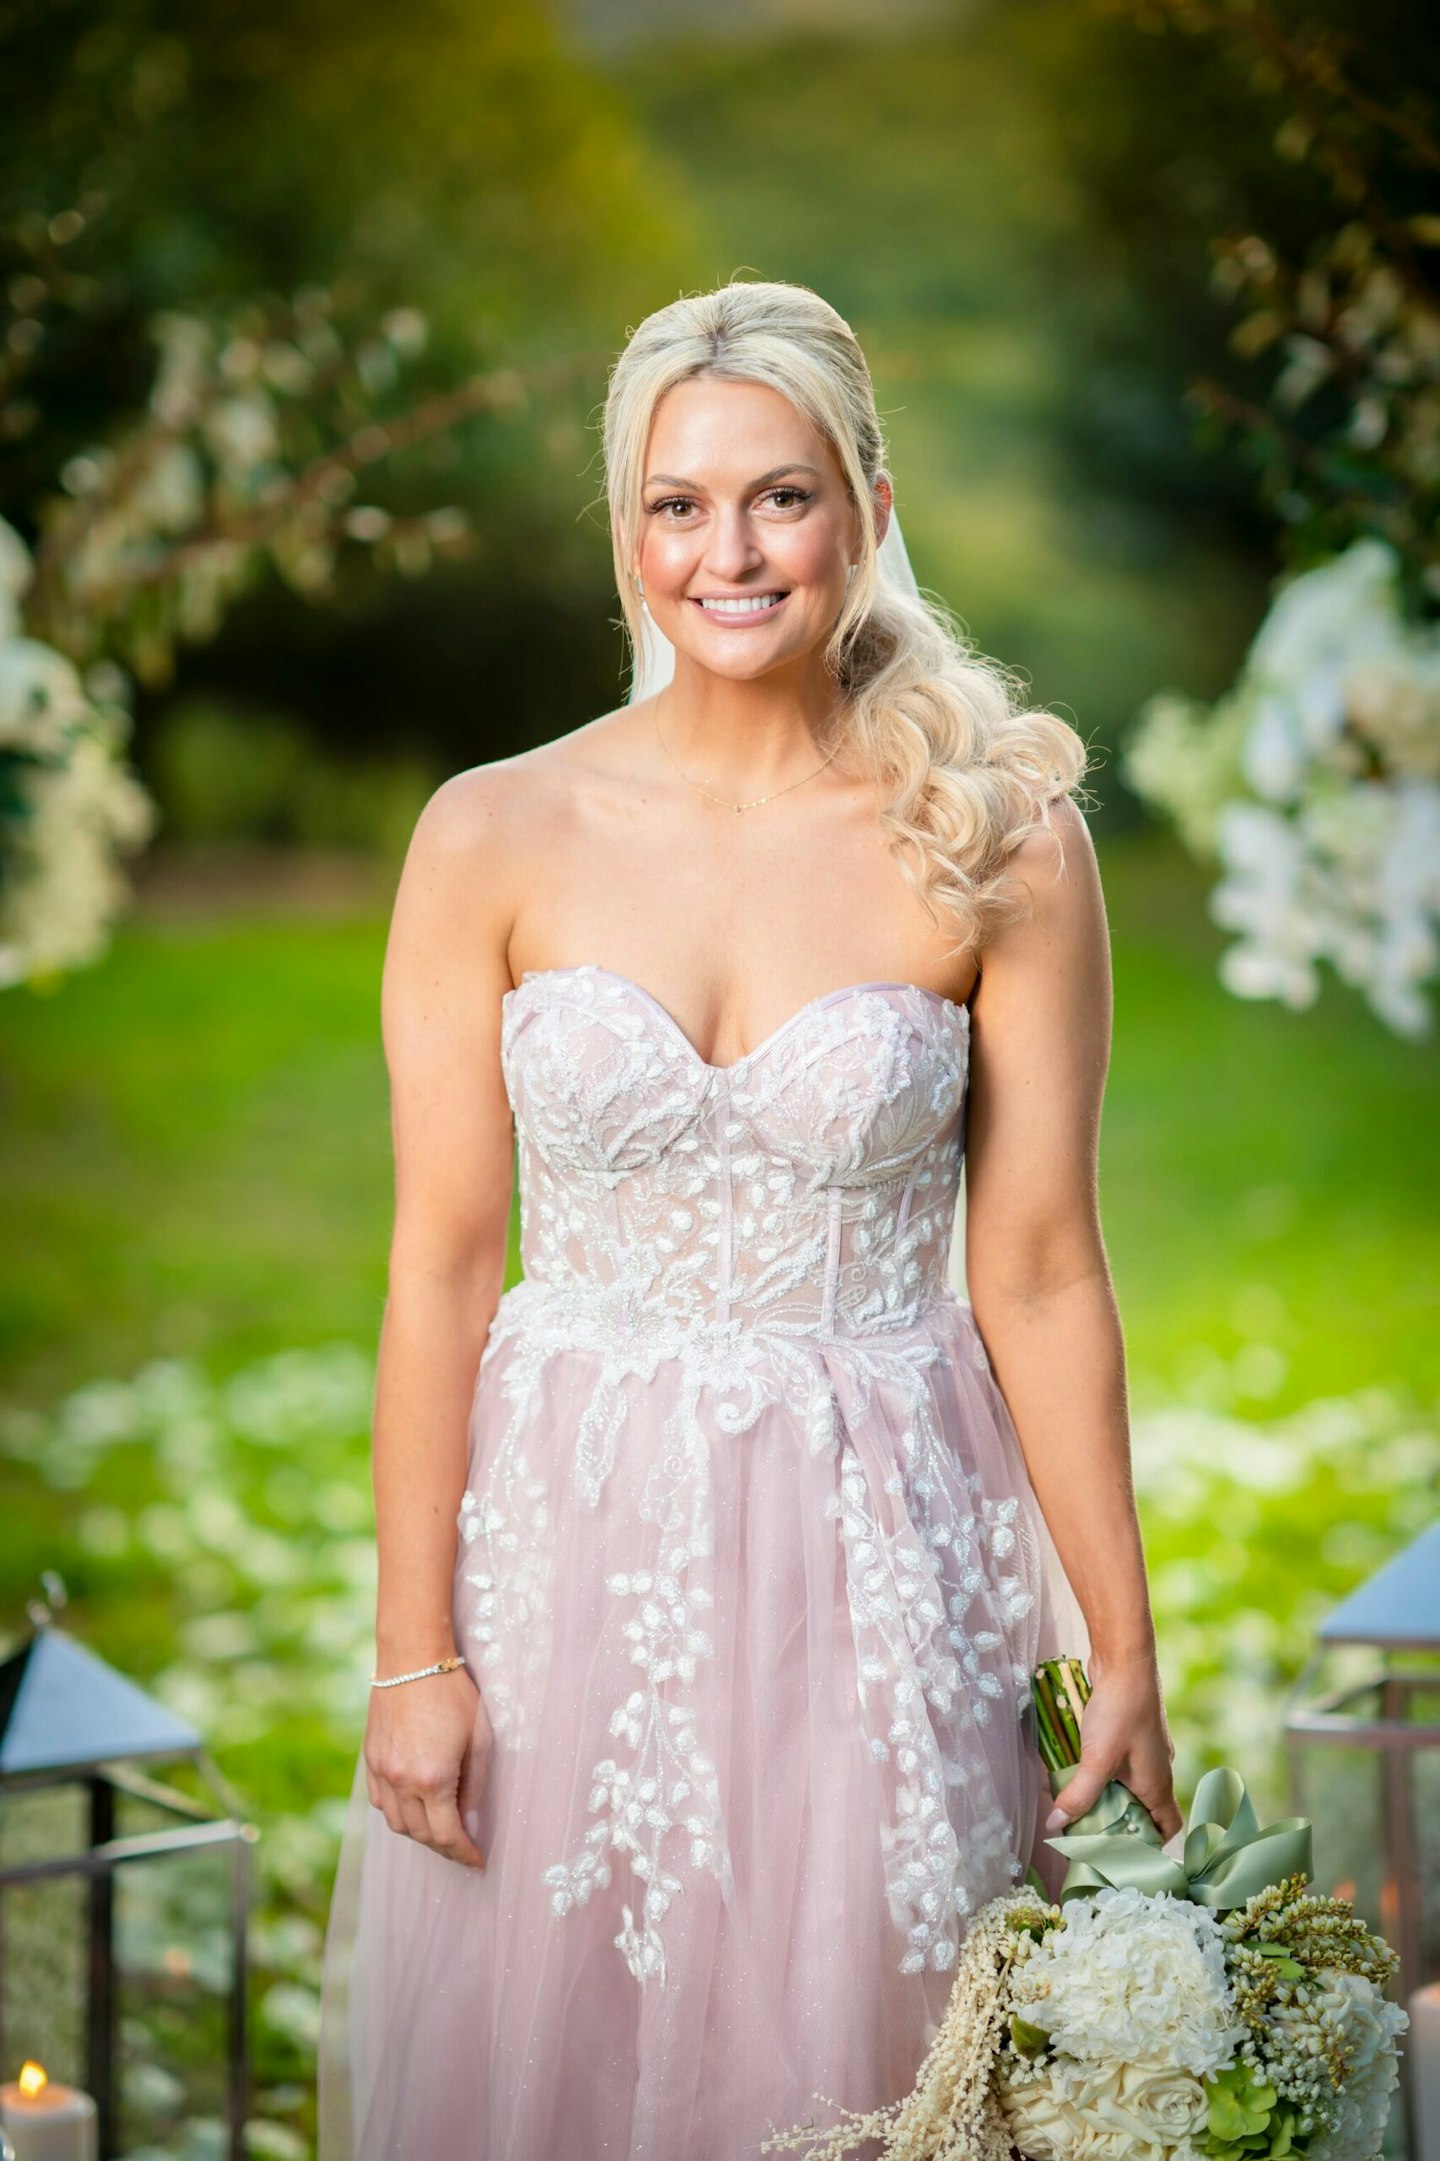 Alyssa from Married At First Sight on her wedding day